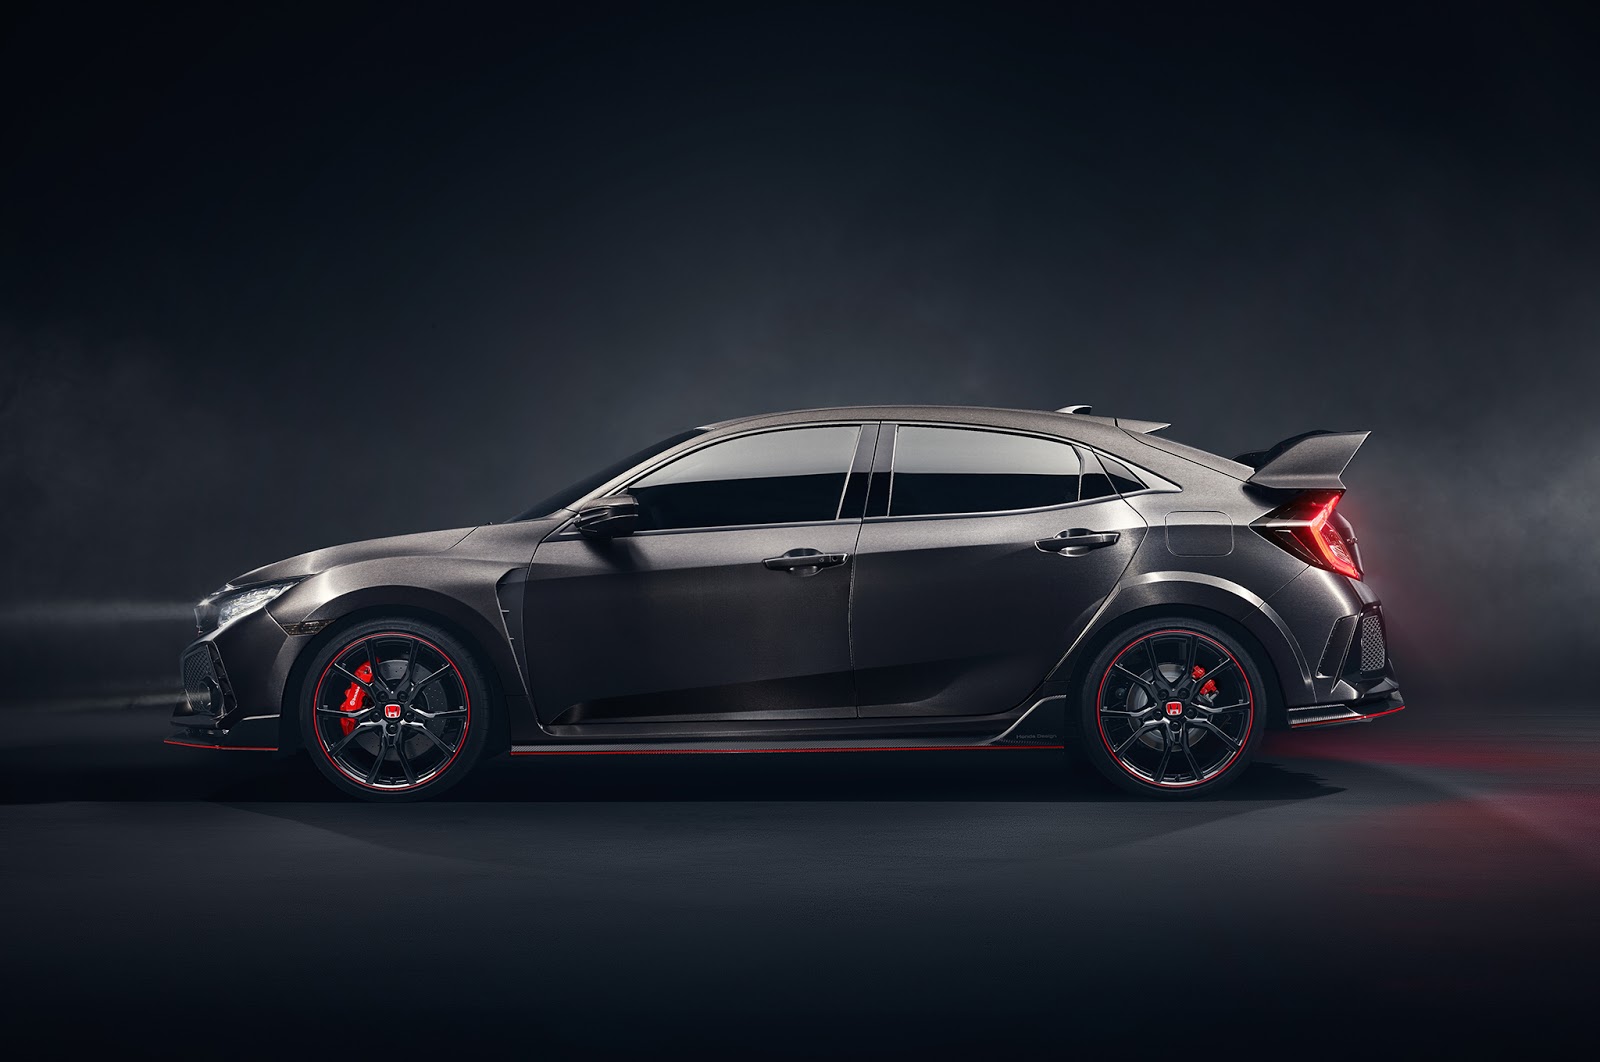 2018 Honda Civic Type R Prototype Is The One Coming To U.S. And We ...